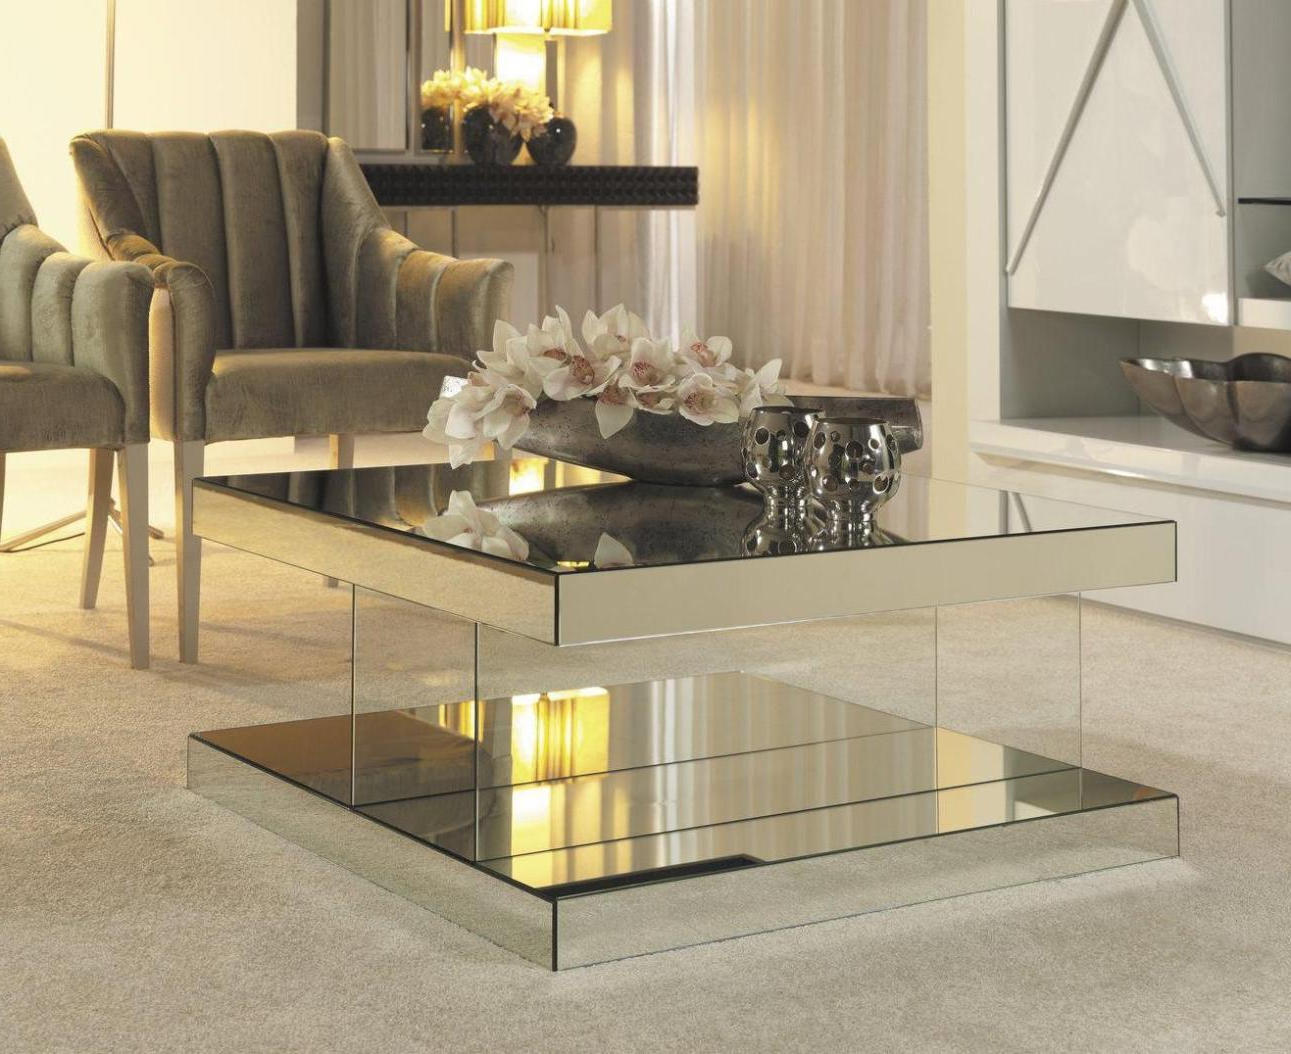 Mirrored Coffee Table Tray | Roy Home Design